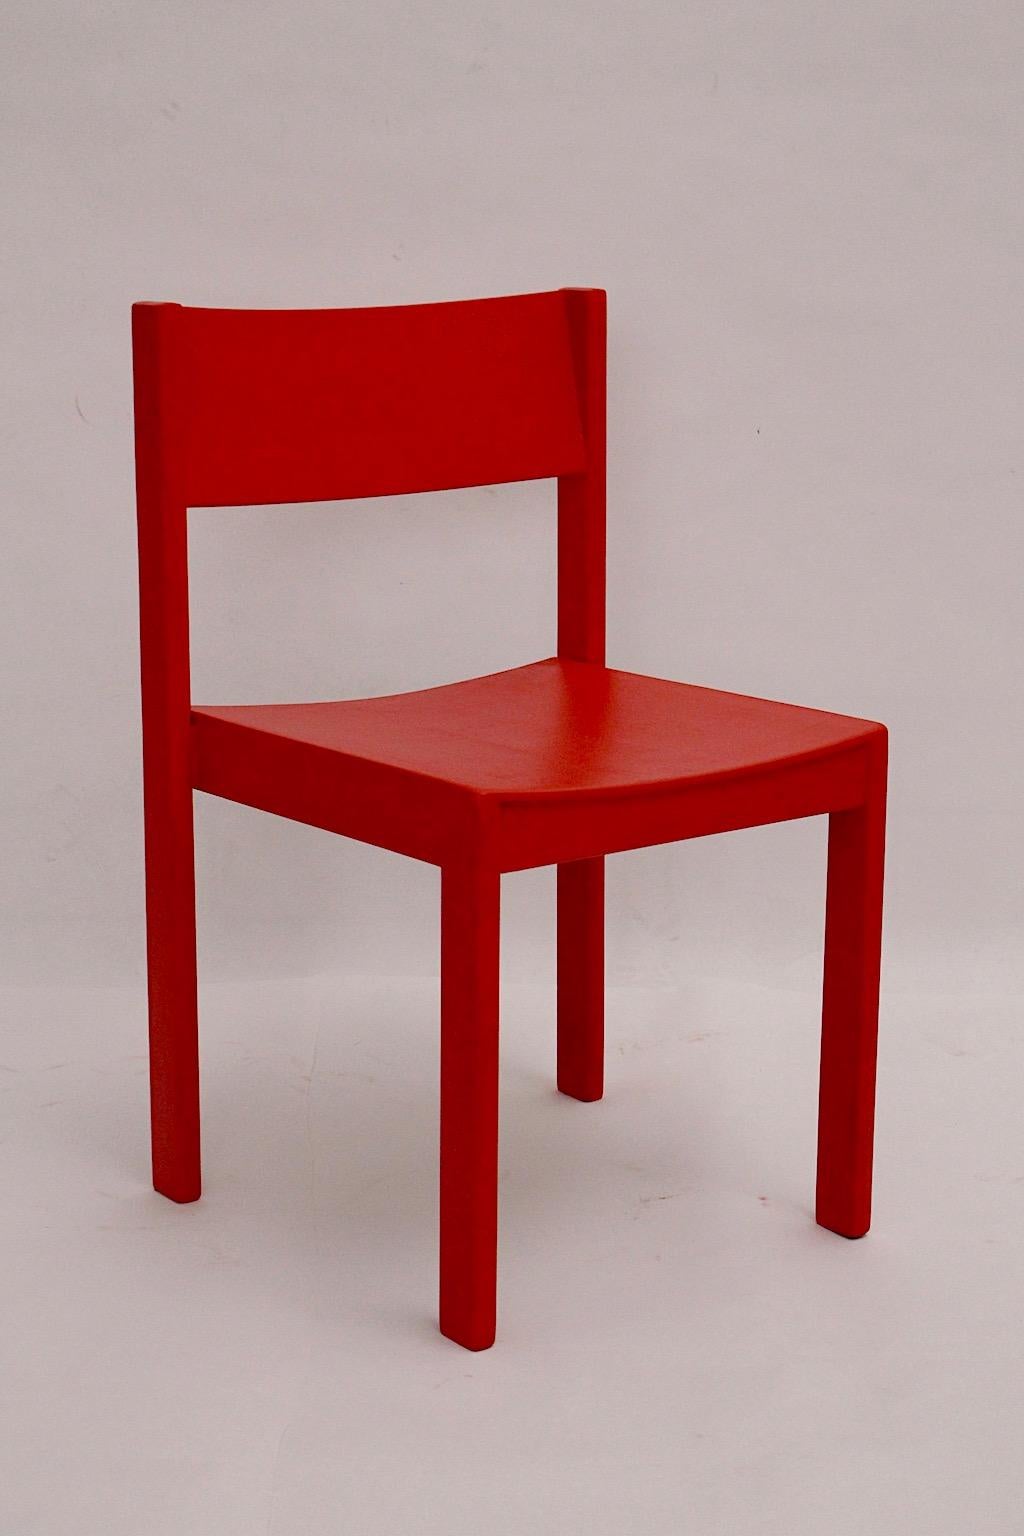 Lacquered Mid-Century Modern Four Red Beech Dining Room Chairs or Chairs 1950s Austria For Sale